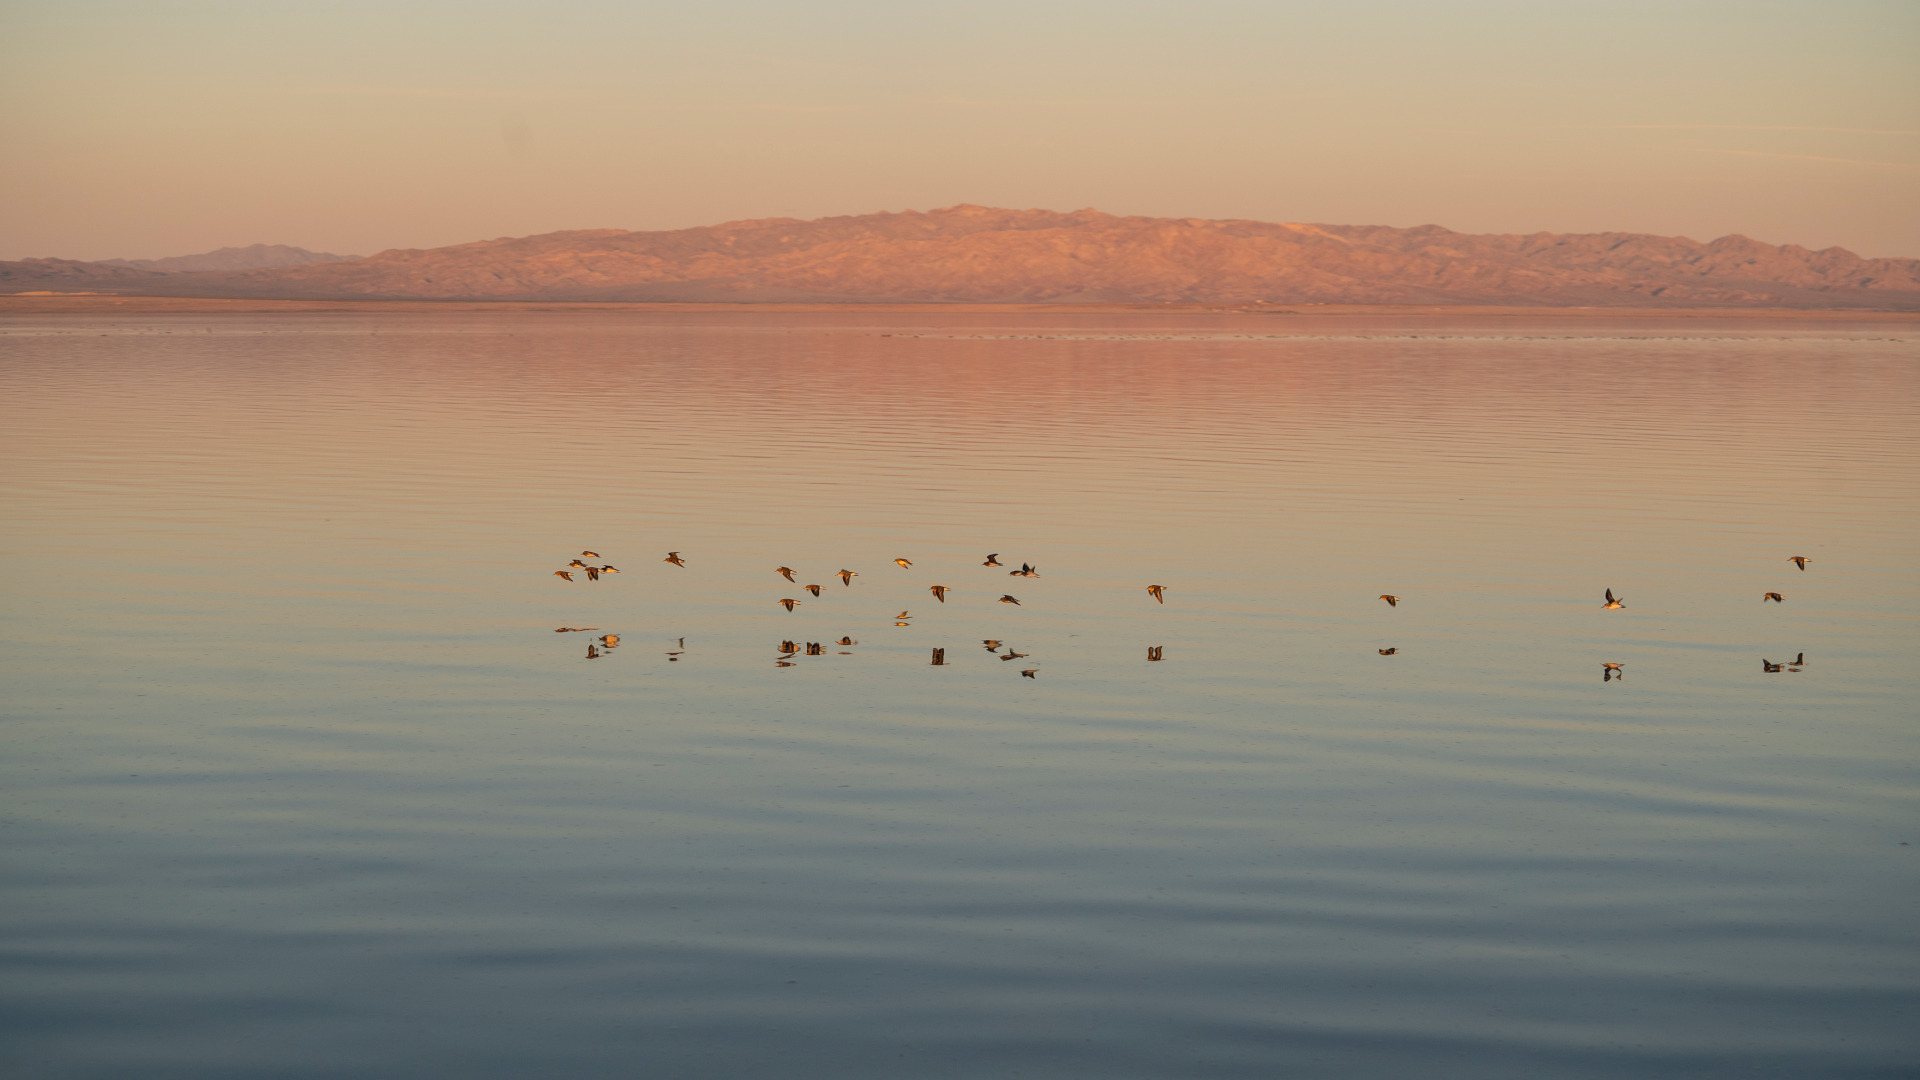 The Salton Sea is a 316-square mile, shallow glaze of water in Southern California that has been receding in recent years. Scientists believe the toxic dust kicked up from the exposed lakebed is contributing to respiratory disease in the region.  | All photos by KITRA CAHANA for UNDARK